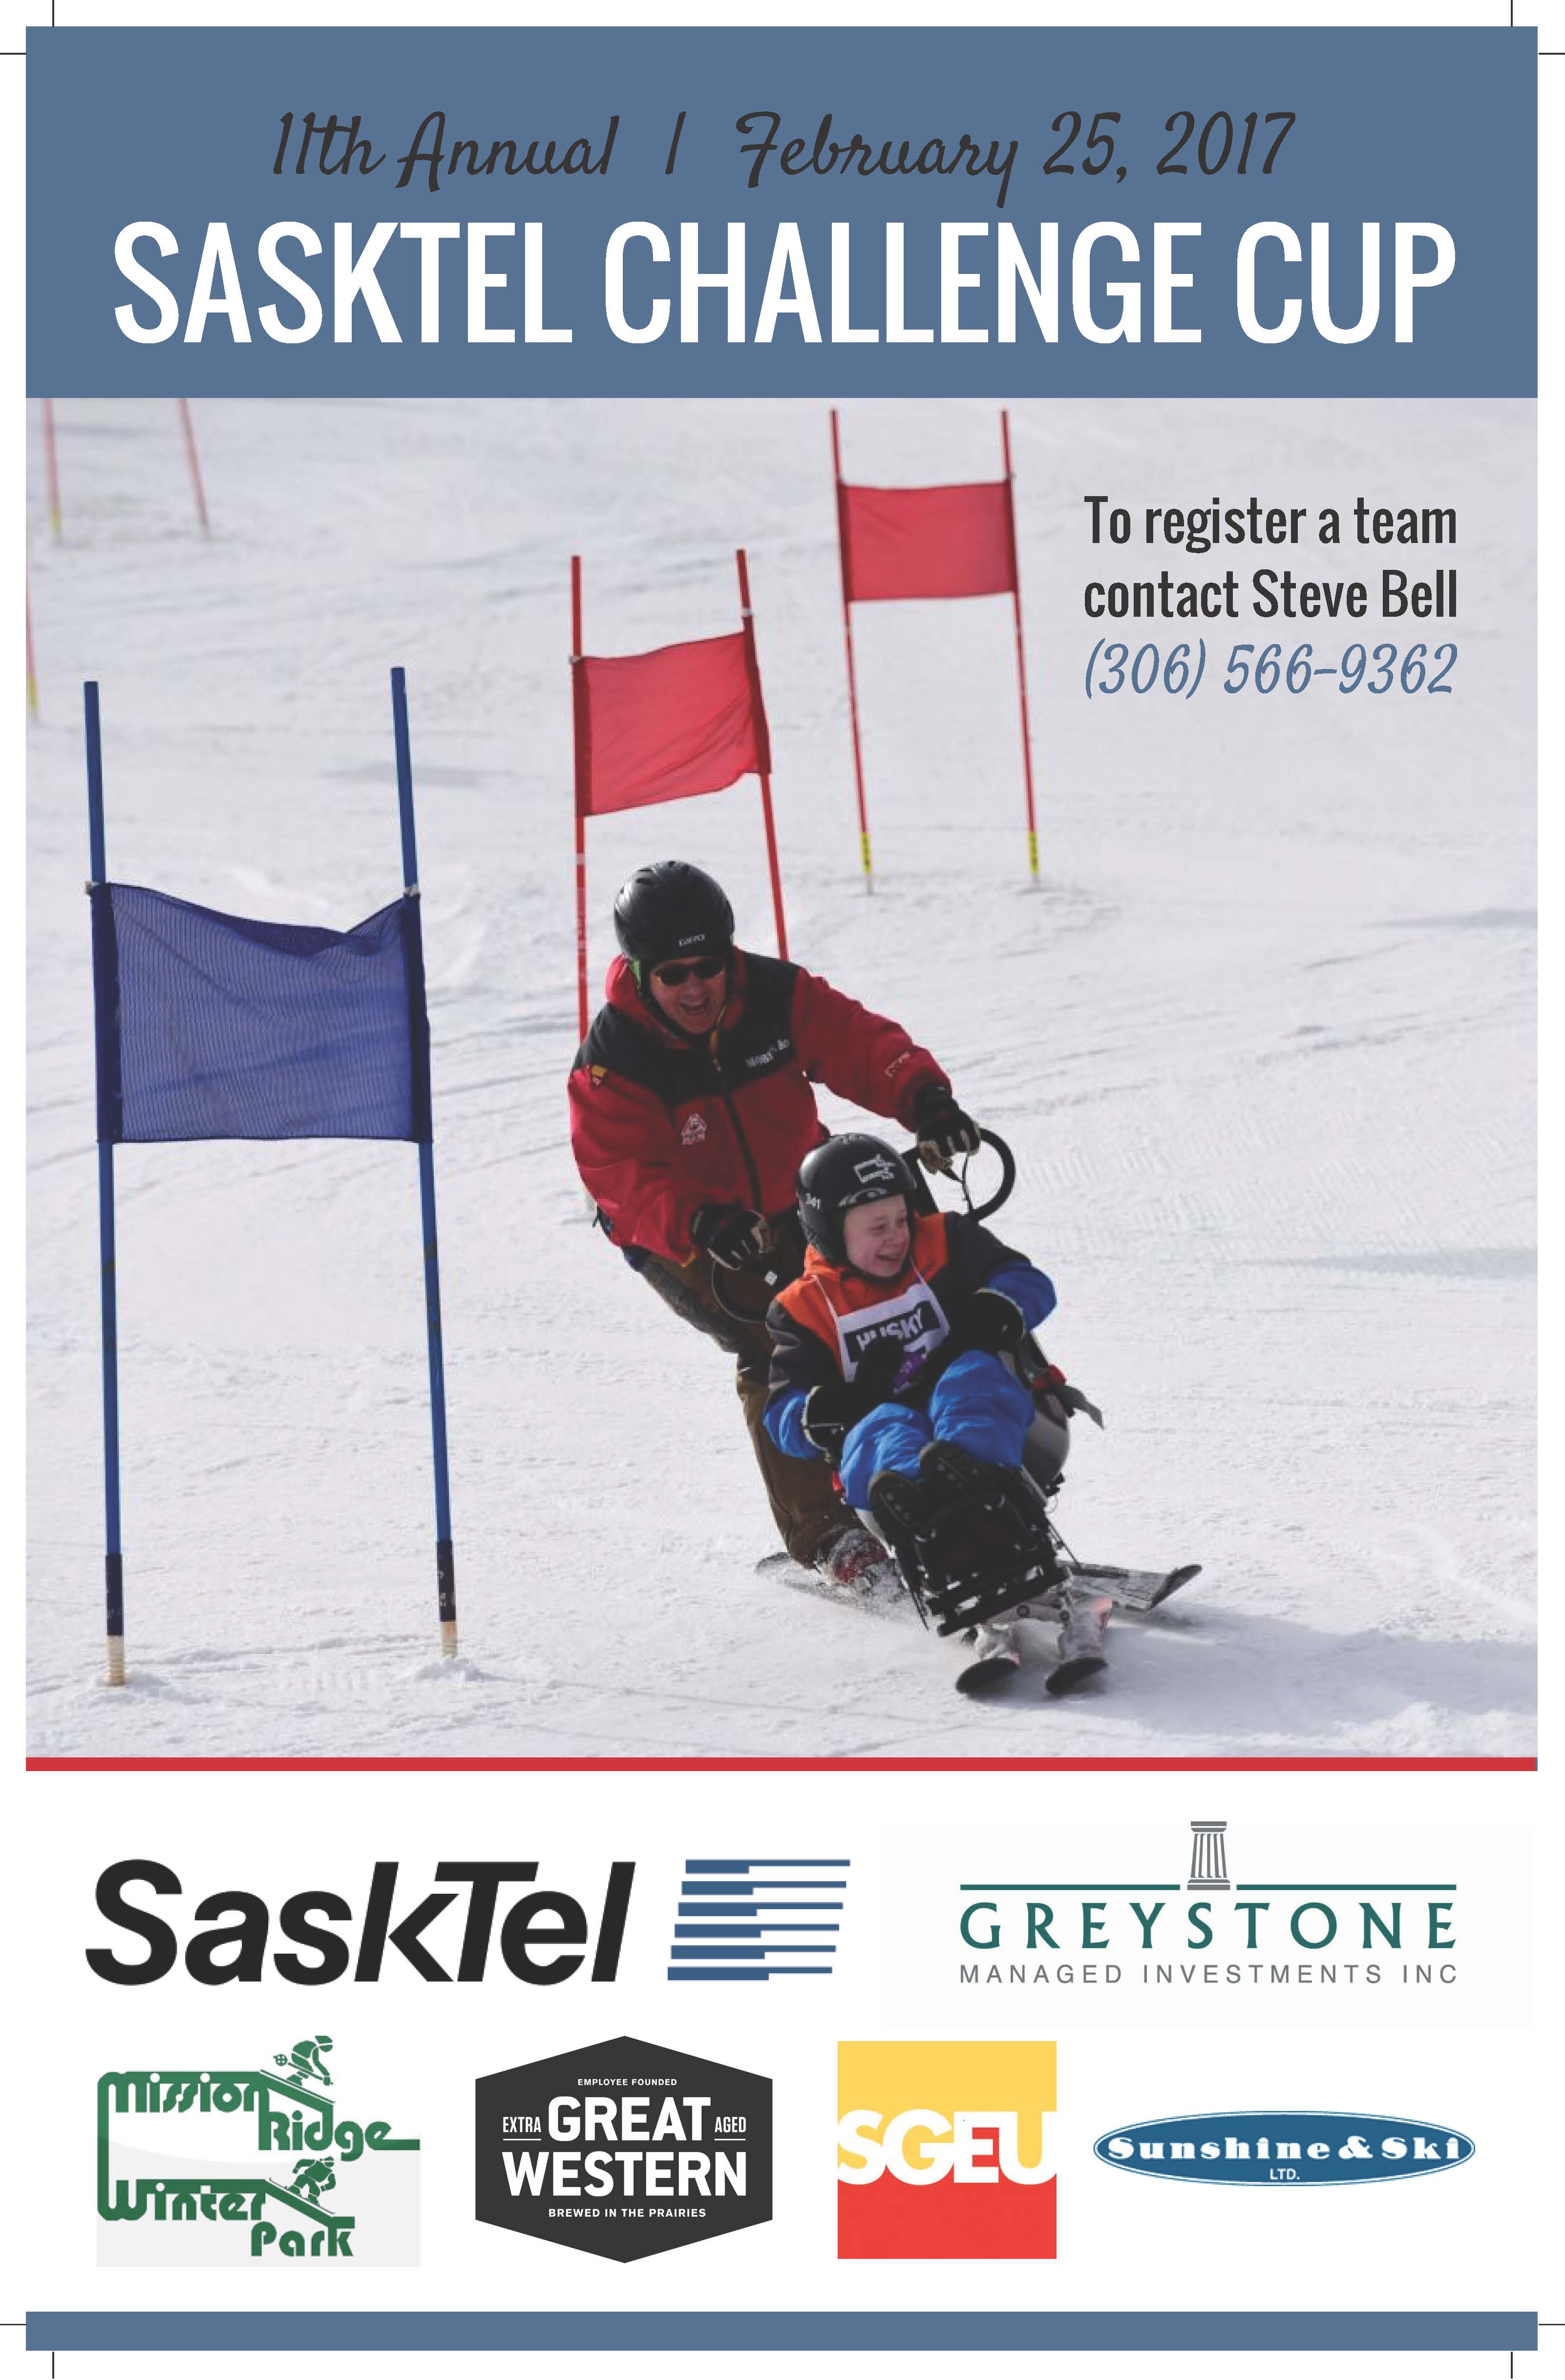 11th Annual SaskTel Challenge Cup